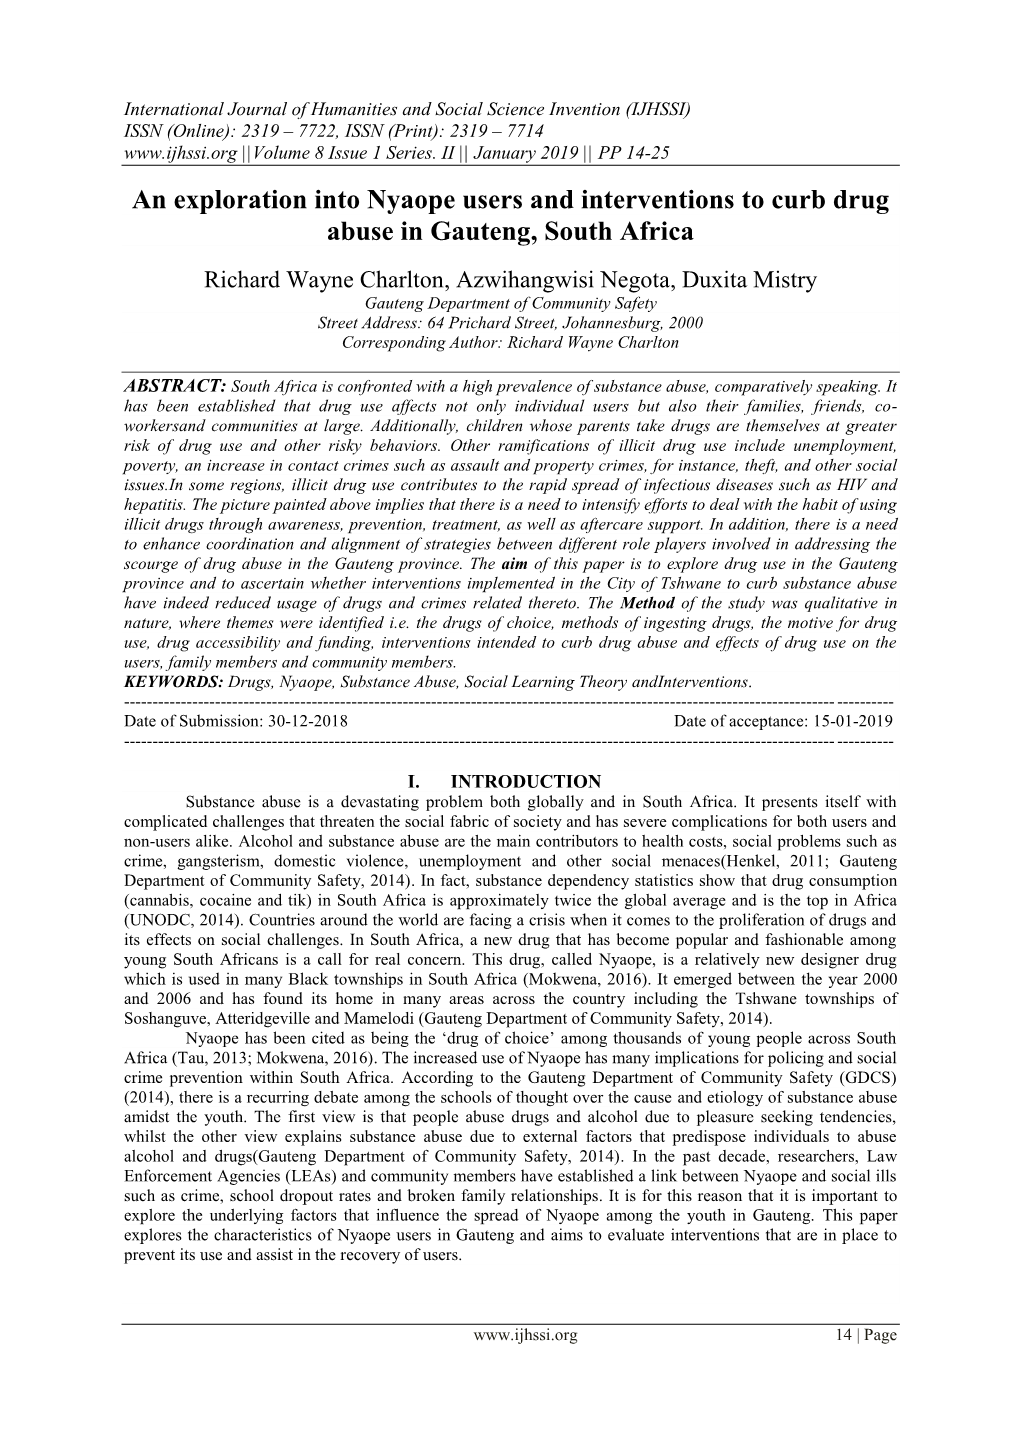 An Exploration Into Nyaope Users and Interventions to Curb Drug Abuse in Gauteng, South Africa